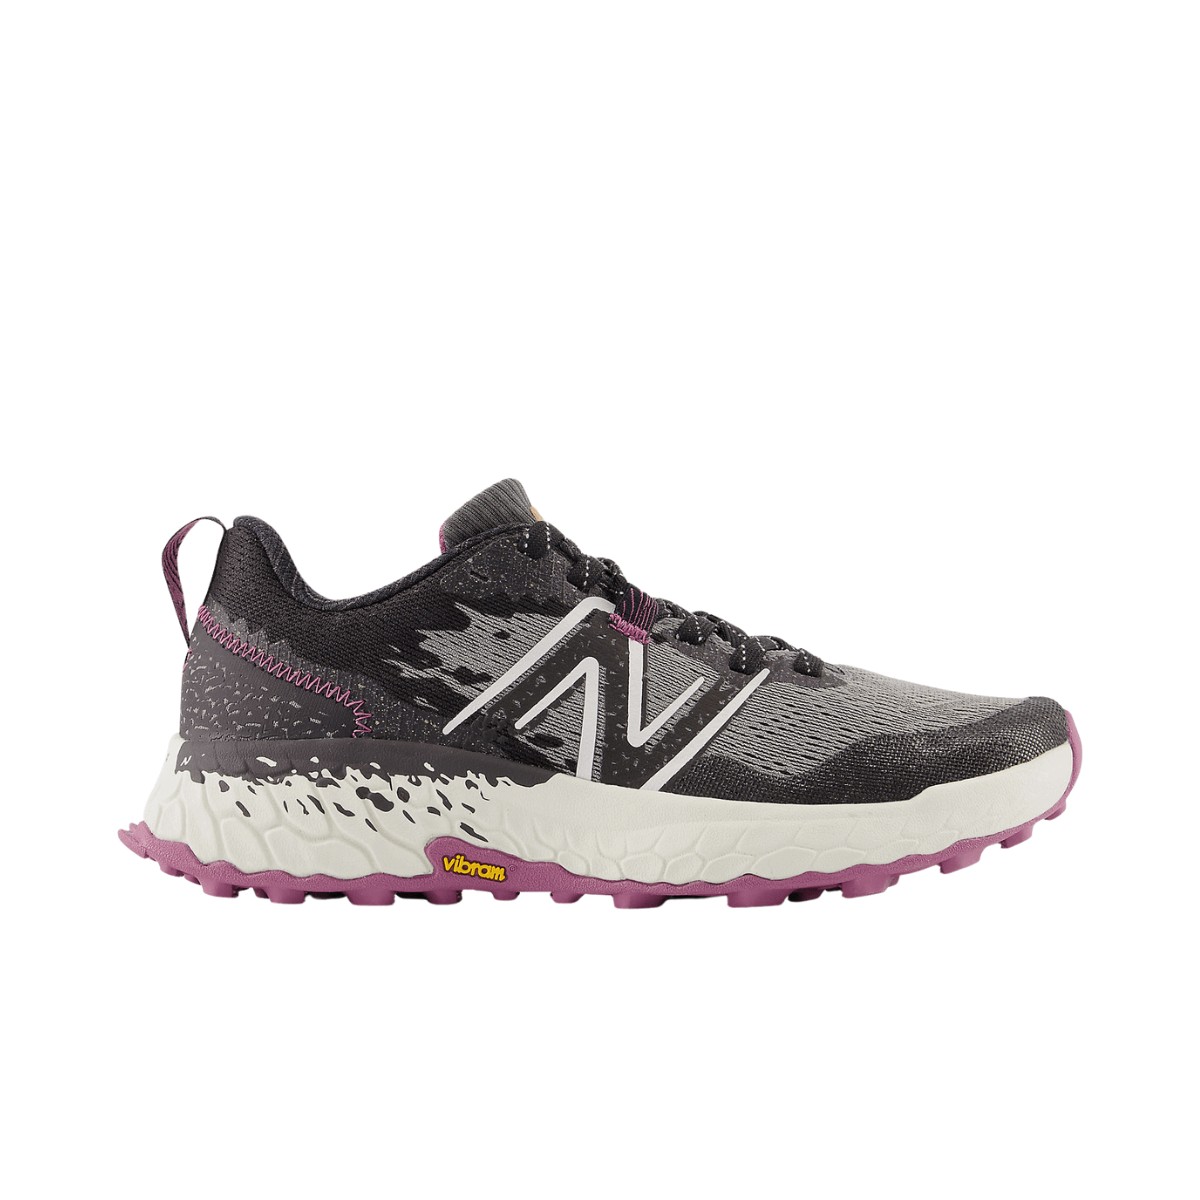 Chaussures New Balance Fresh Foam X Hierro V7 Gris Pourpre AW22 Femme, Taille 37 - EUR